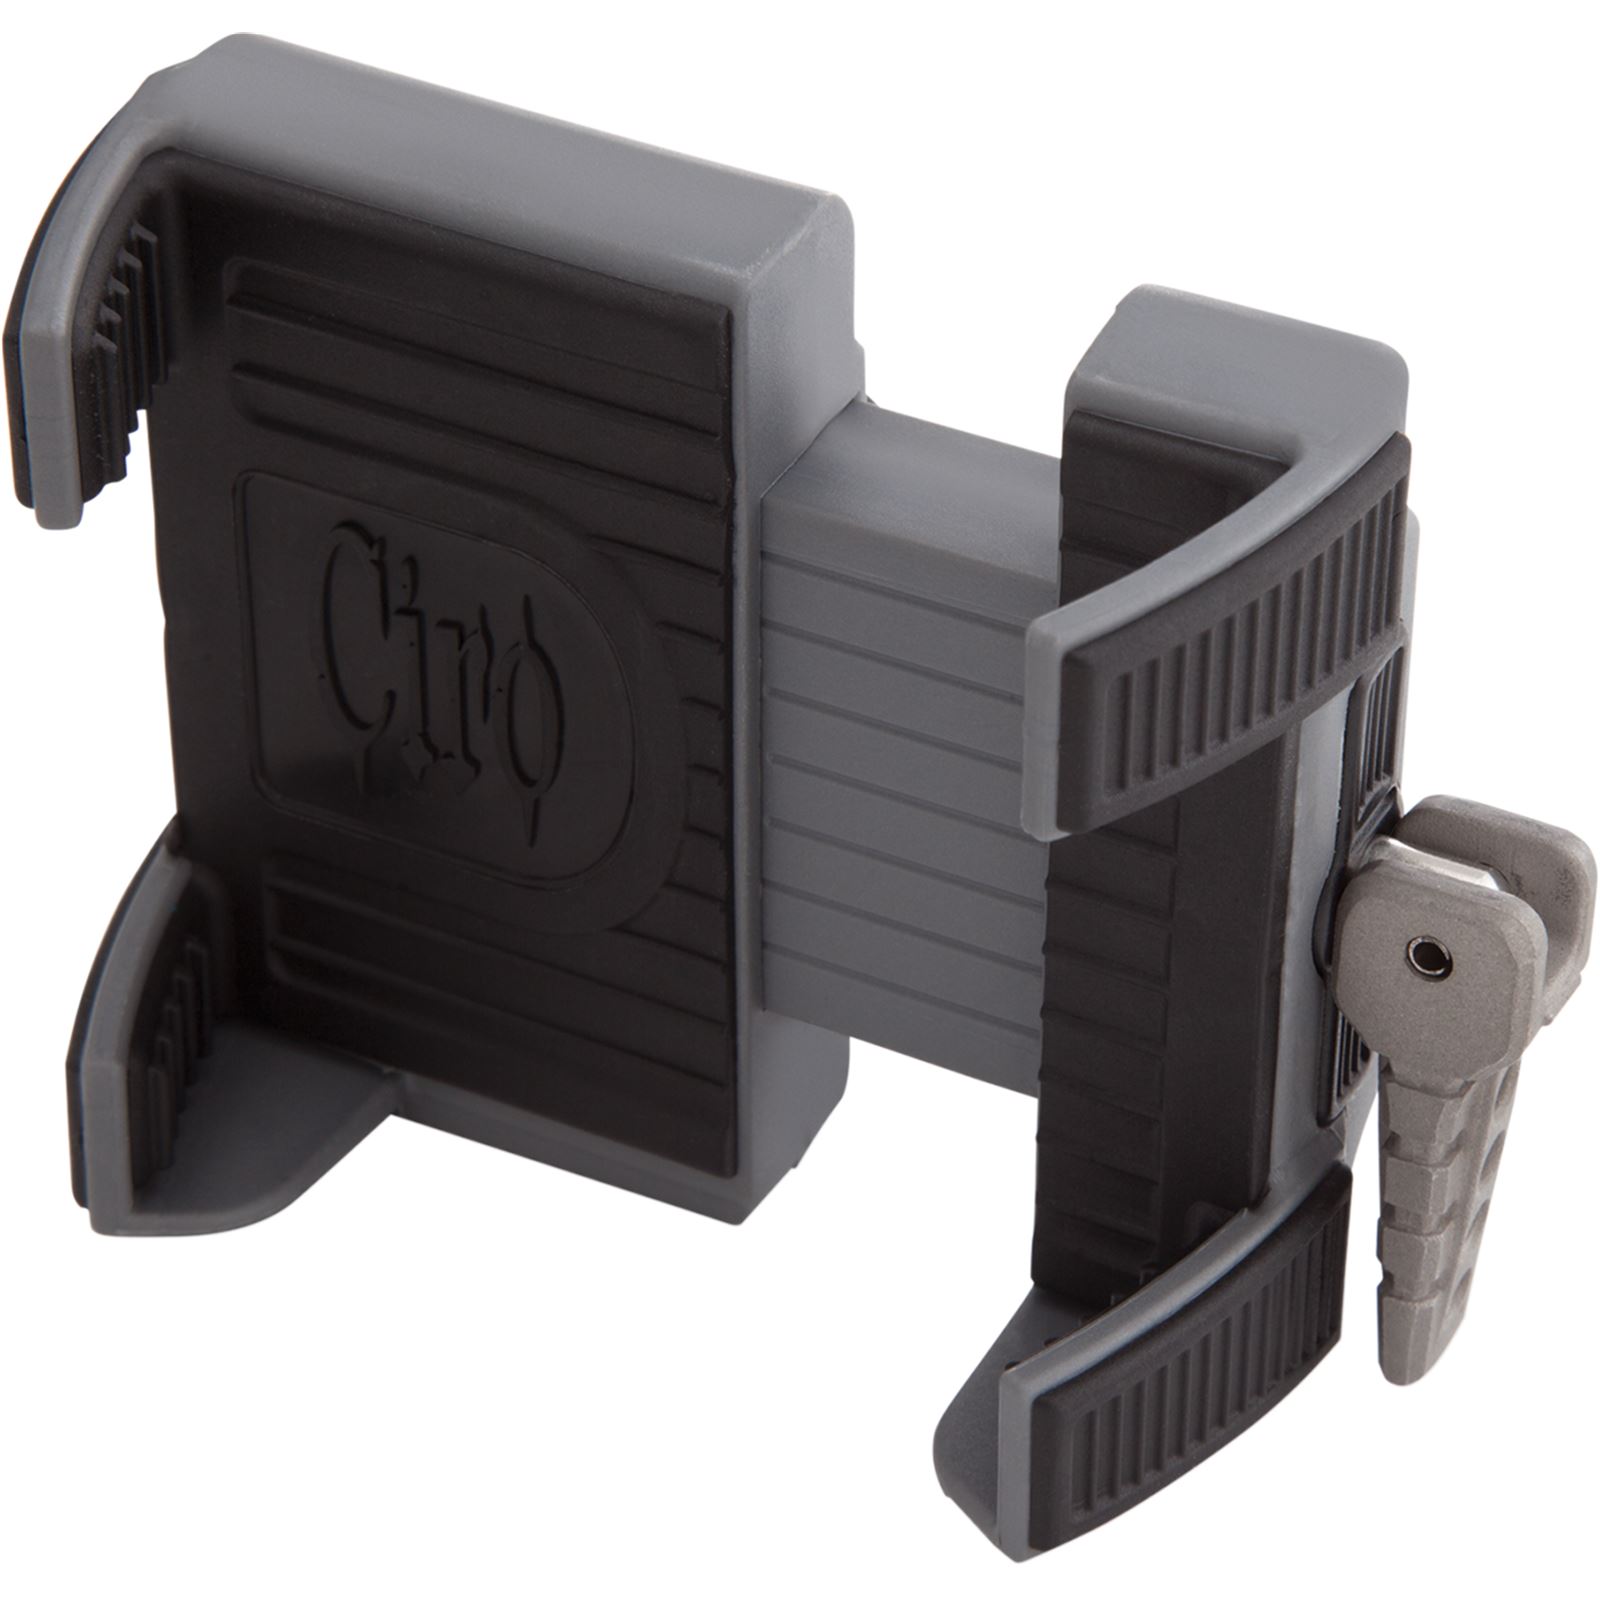 Ciro Premium Holder with Charger